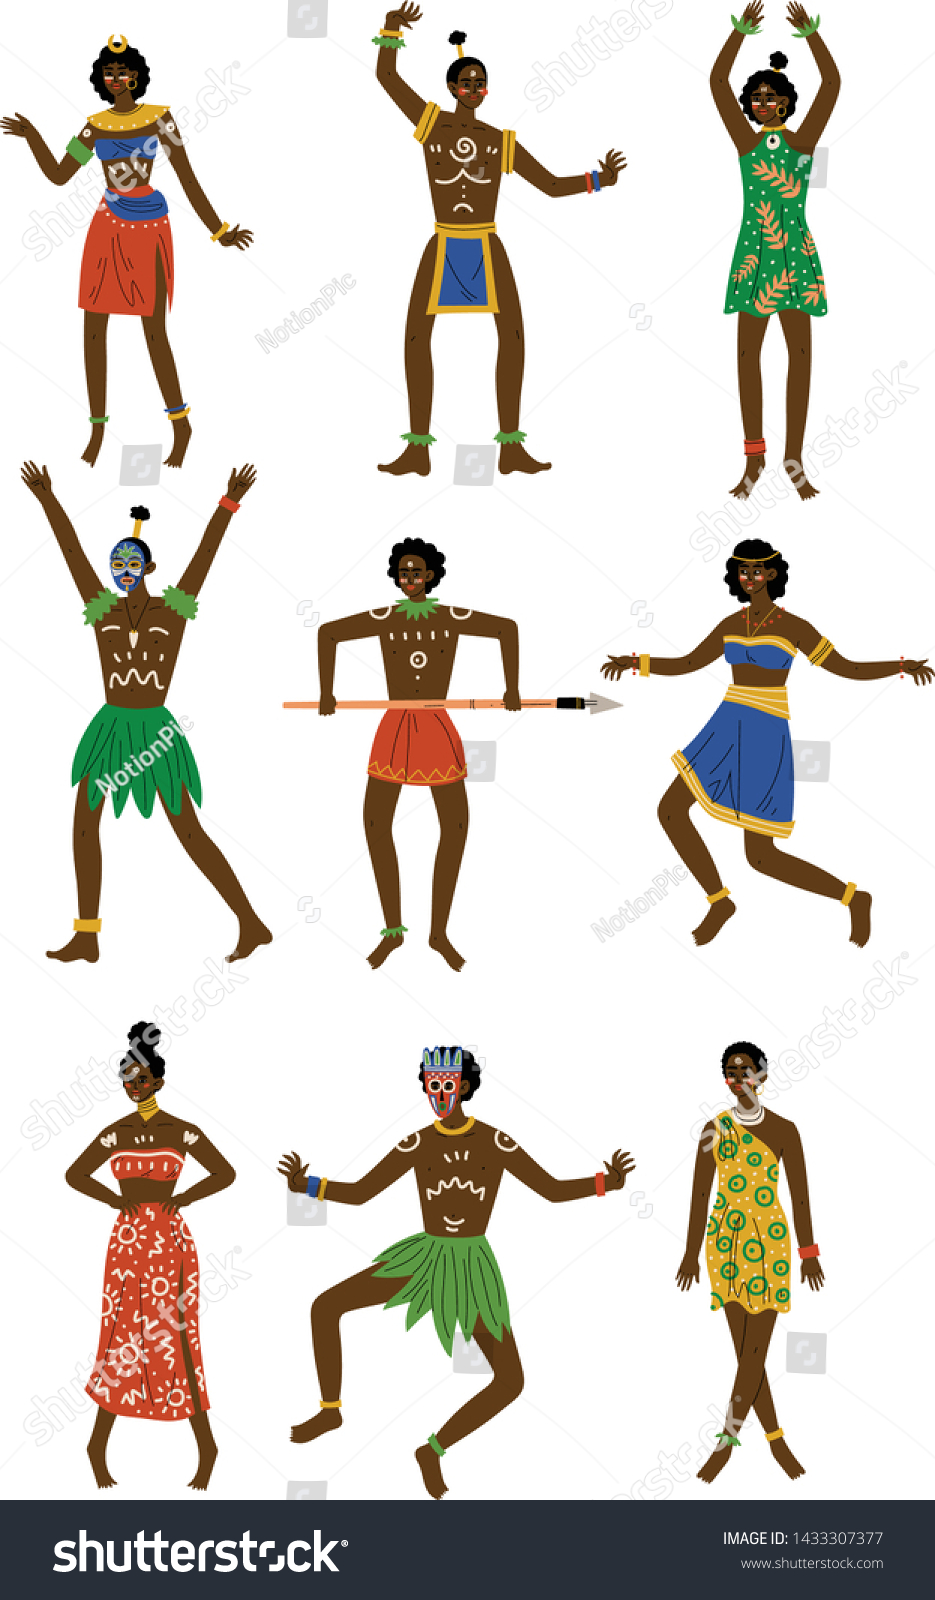 African People Set Male Female Aboriginal Stock Vector Royalty Free 1433307377 Shutterstock 